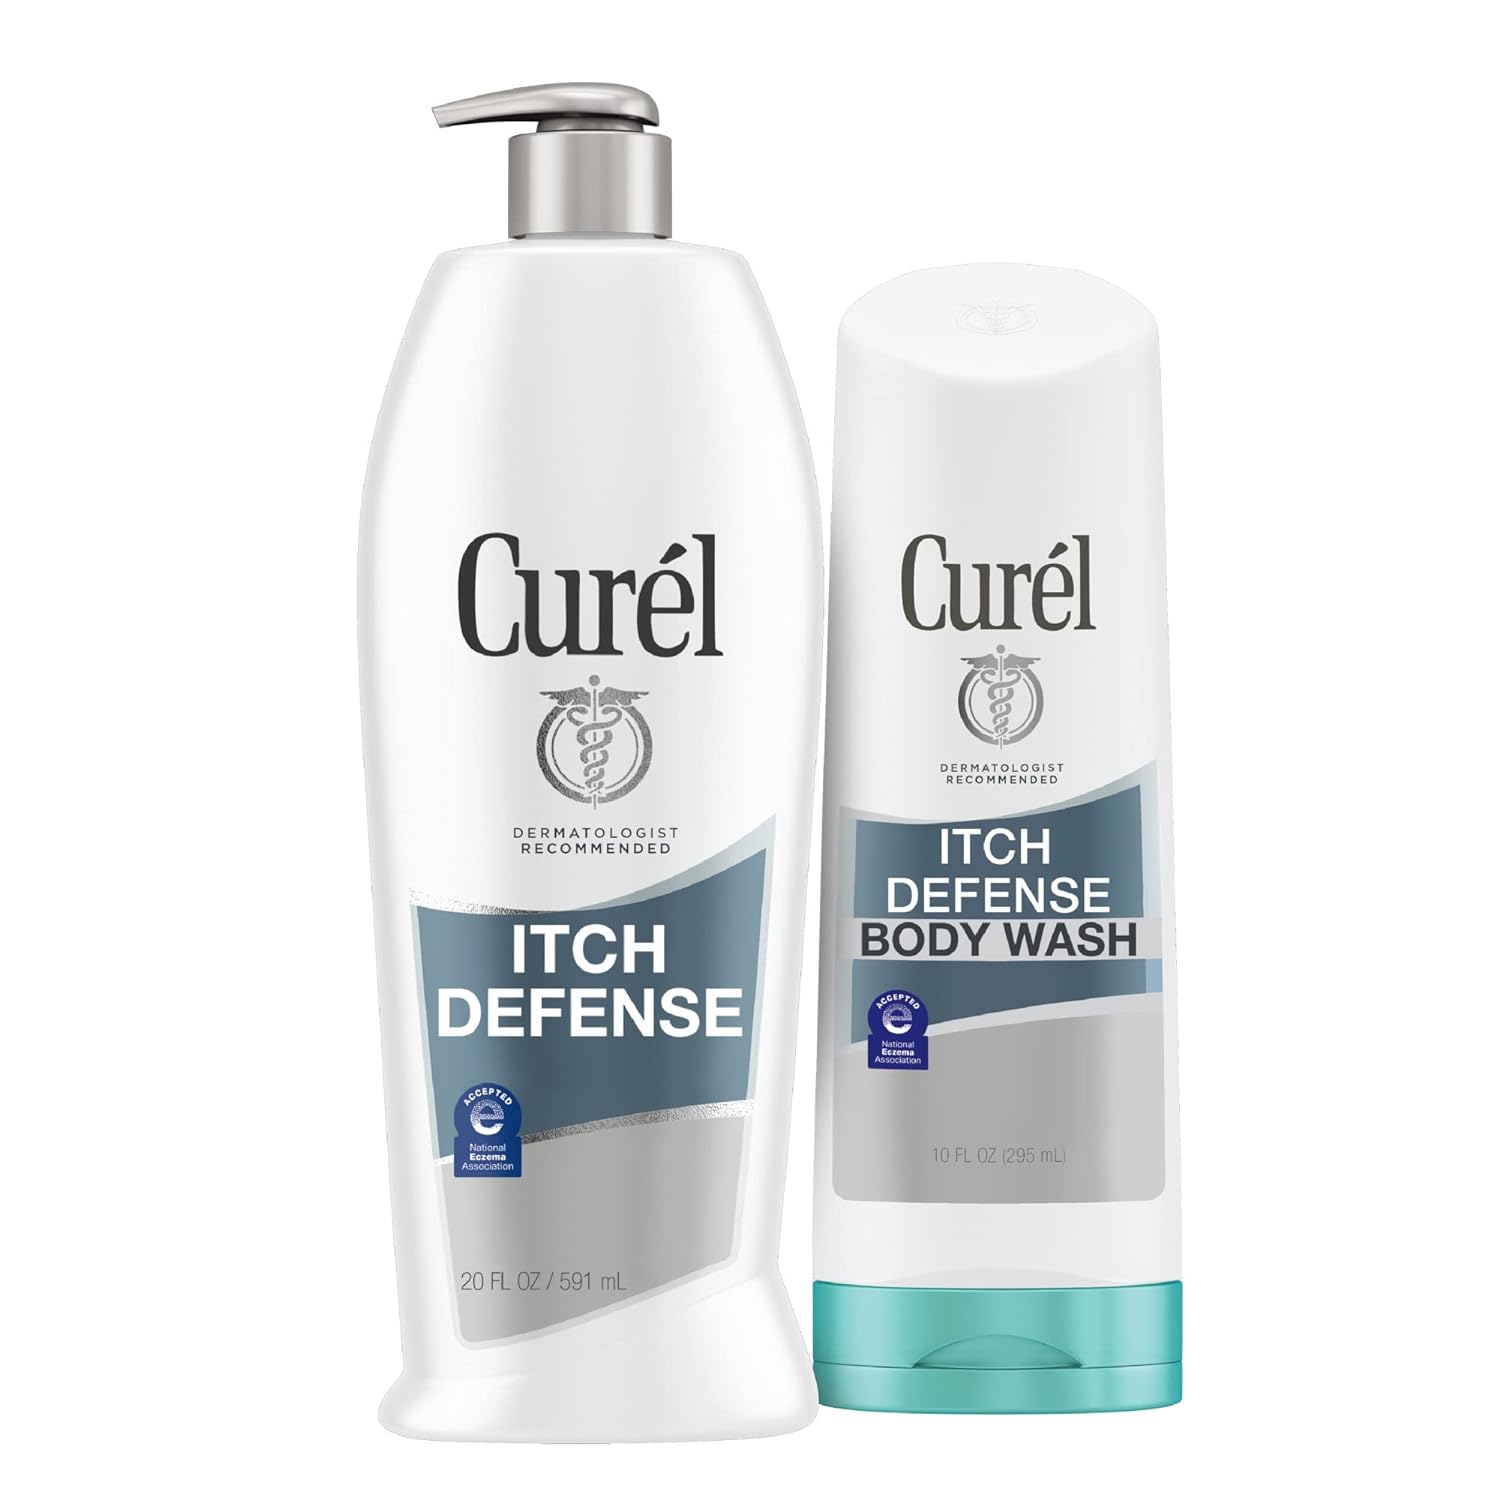 Curel Itch Defense Body Lotion and Body Wash Set, Pair Together to Help Dry Itchy Skin, Lotion with Advanced Ceramides, Wash with Hydrating Jojoba and Olive Oil, 20 fl oz and 10 oz (Set of 2)